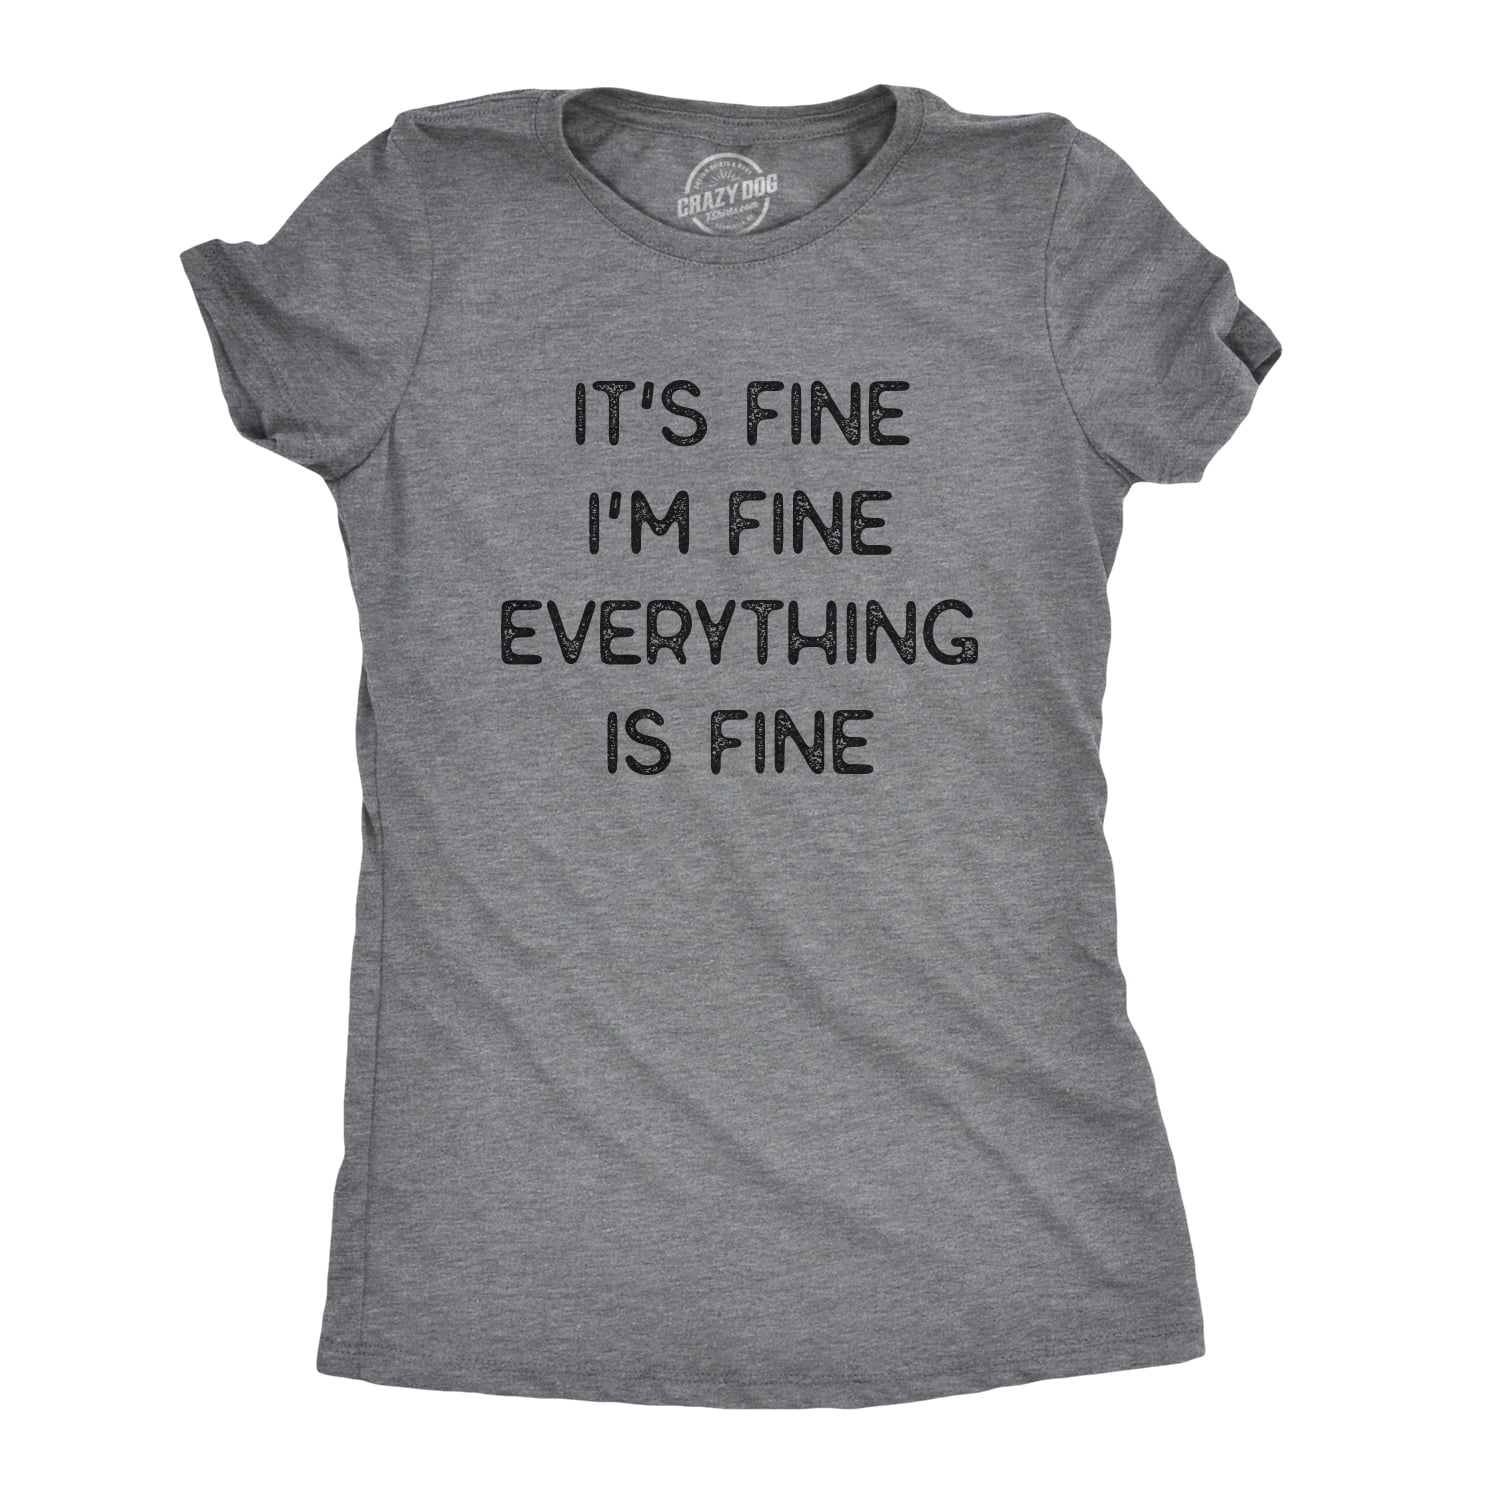 Mom Shirt Funny Sarcastic Shirt Workout Shirt Toddler Mom Tee It/'s Fine I/'m Fine Everything is Fine T-Shirt Introvert Shirt